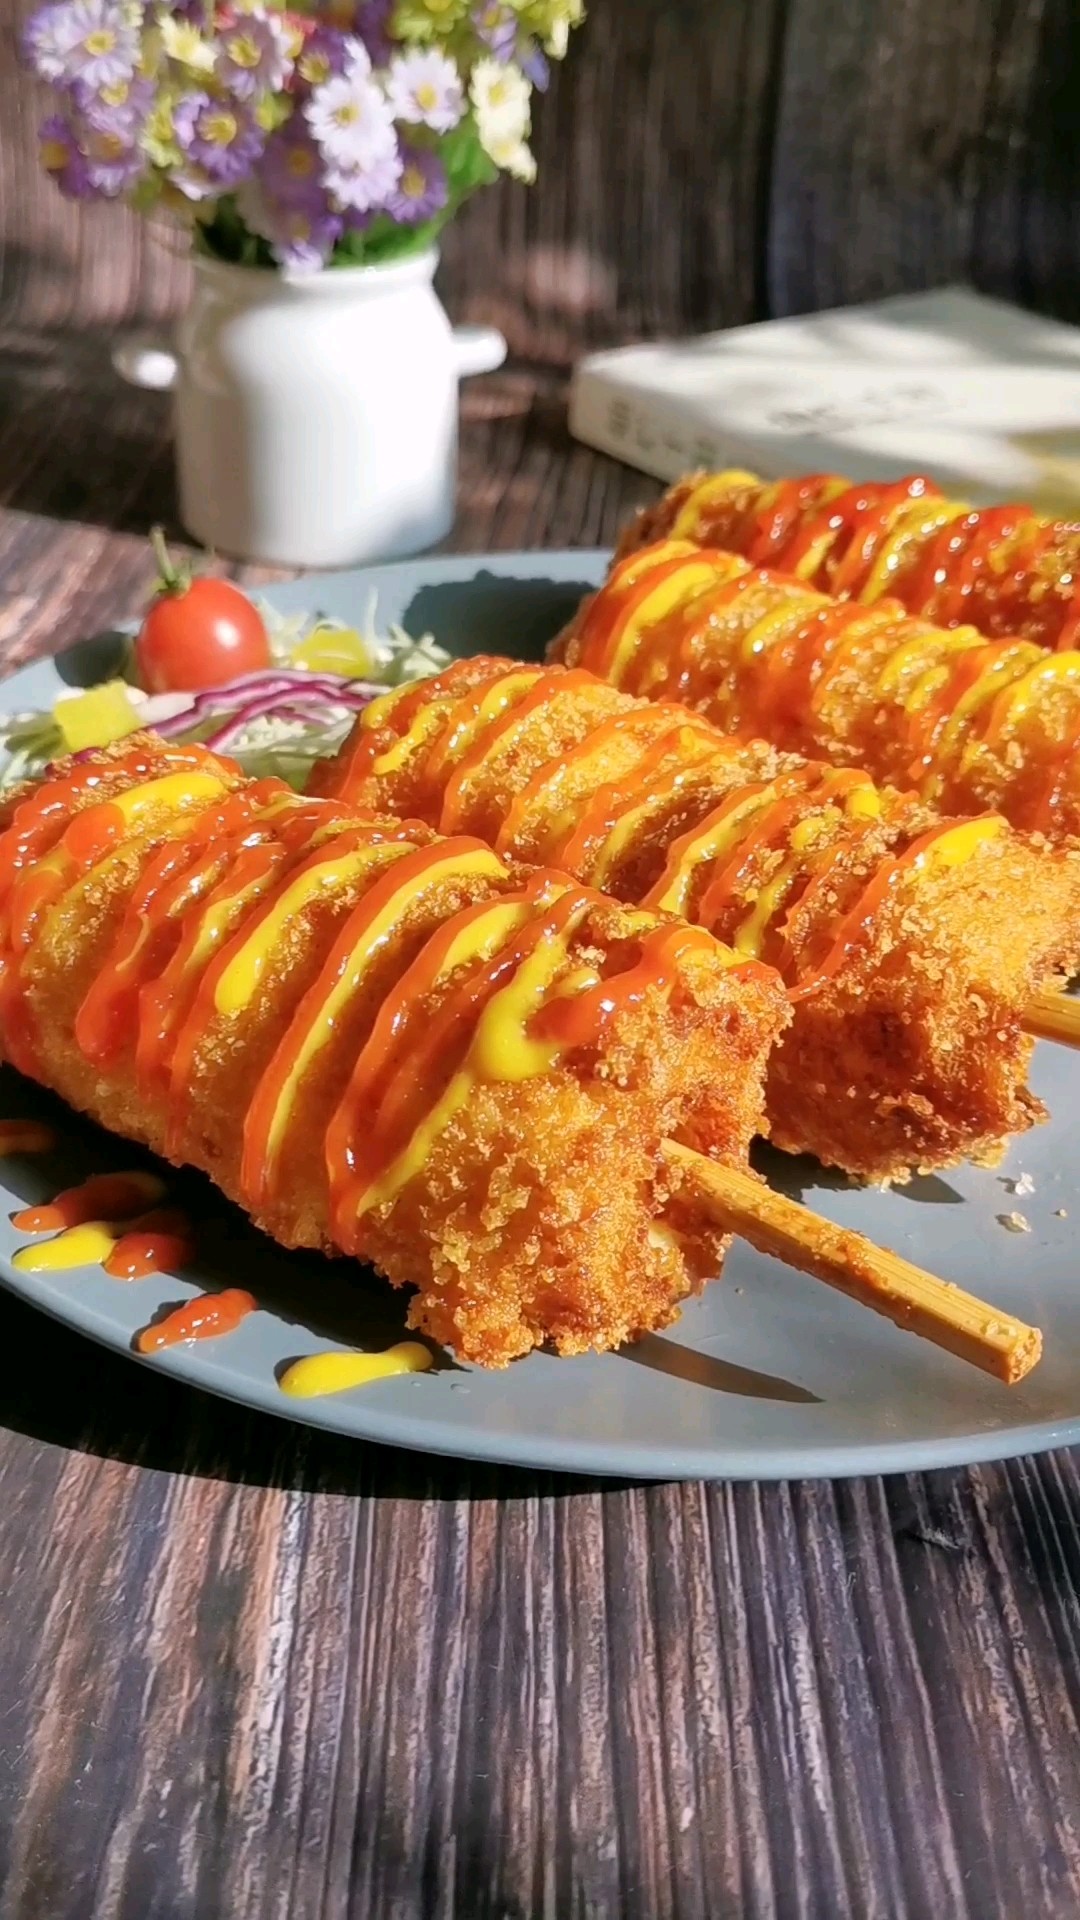 Fragrant and Crispy, So Delicious that Weeping Cheese Hot Dog Sticks! recipe